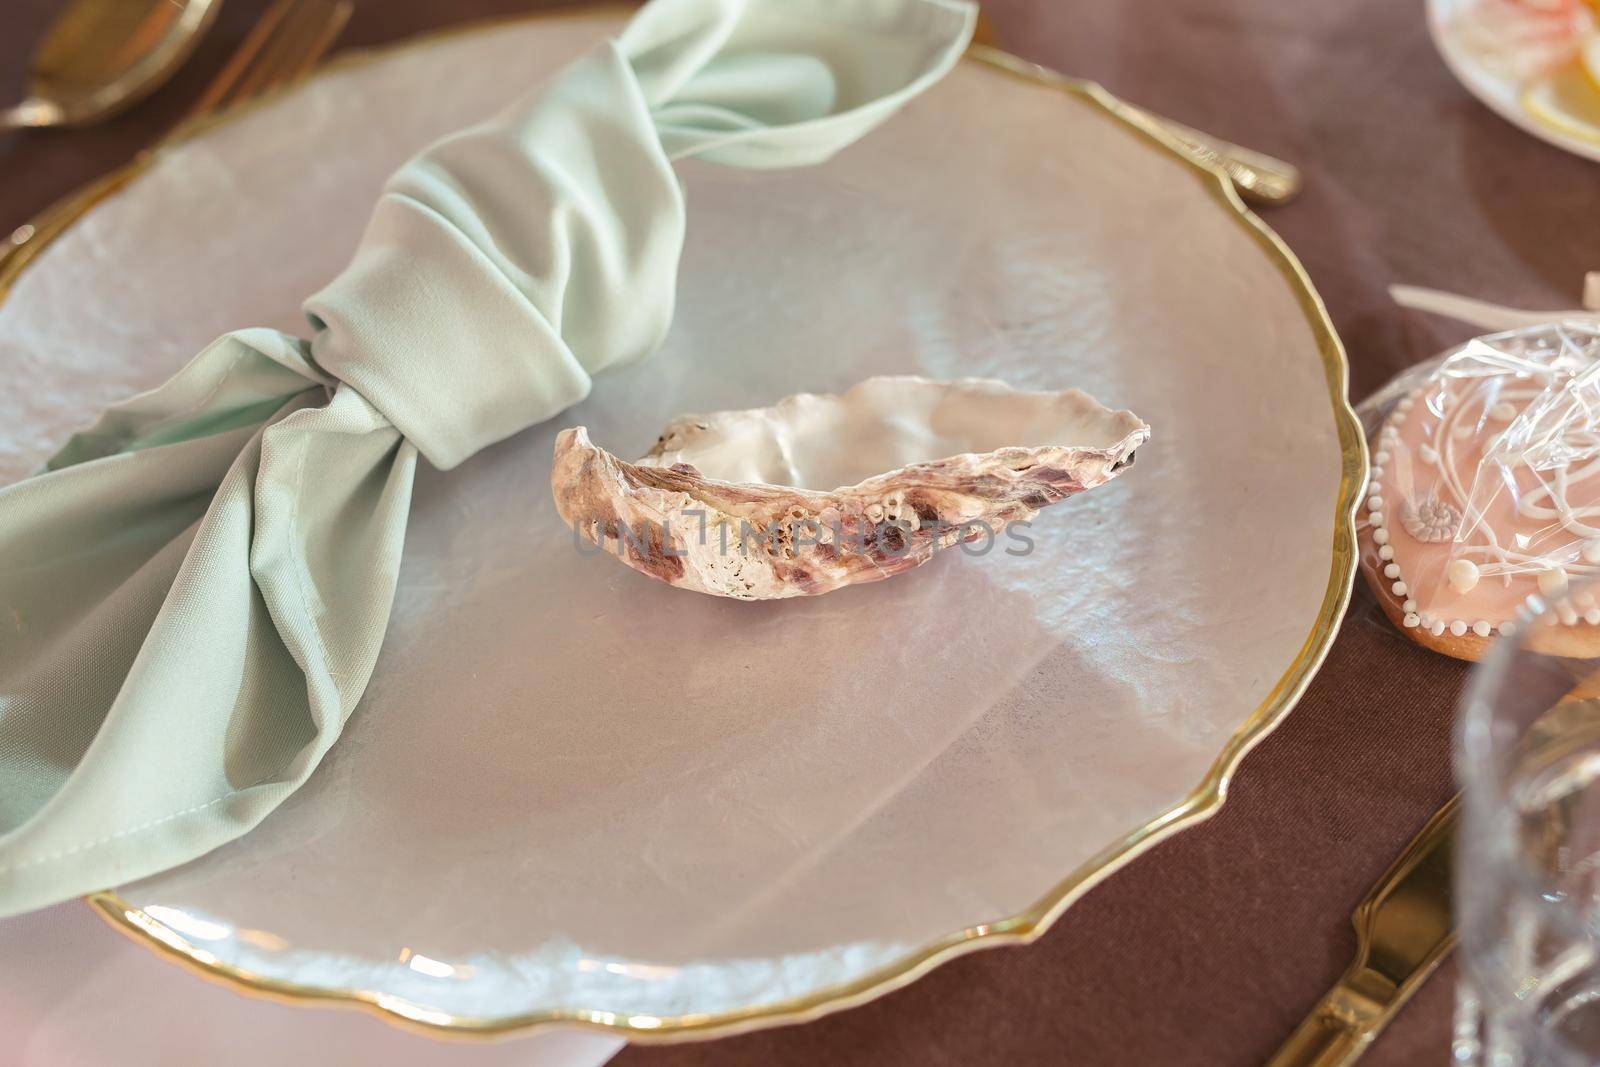 Wedding table setting in a nautical style. A shell and a napkin in the guests' plate.